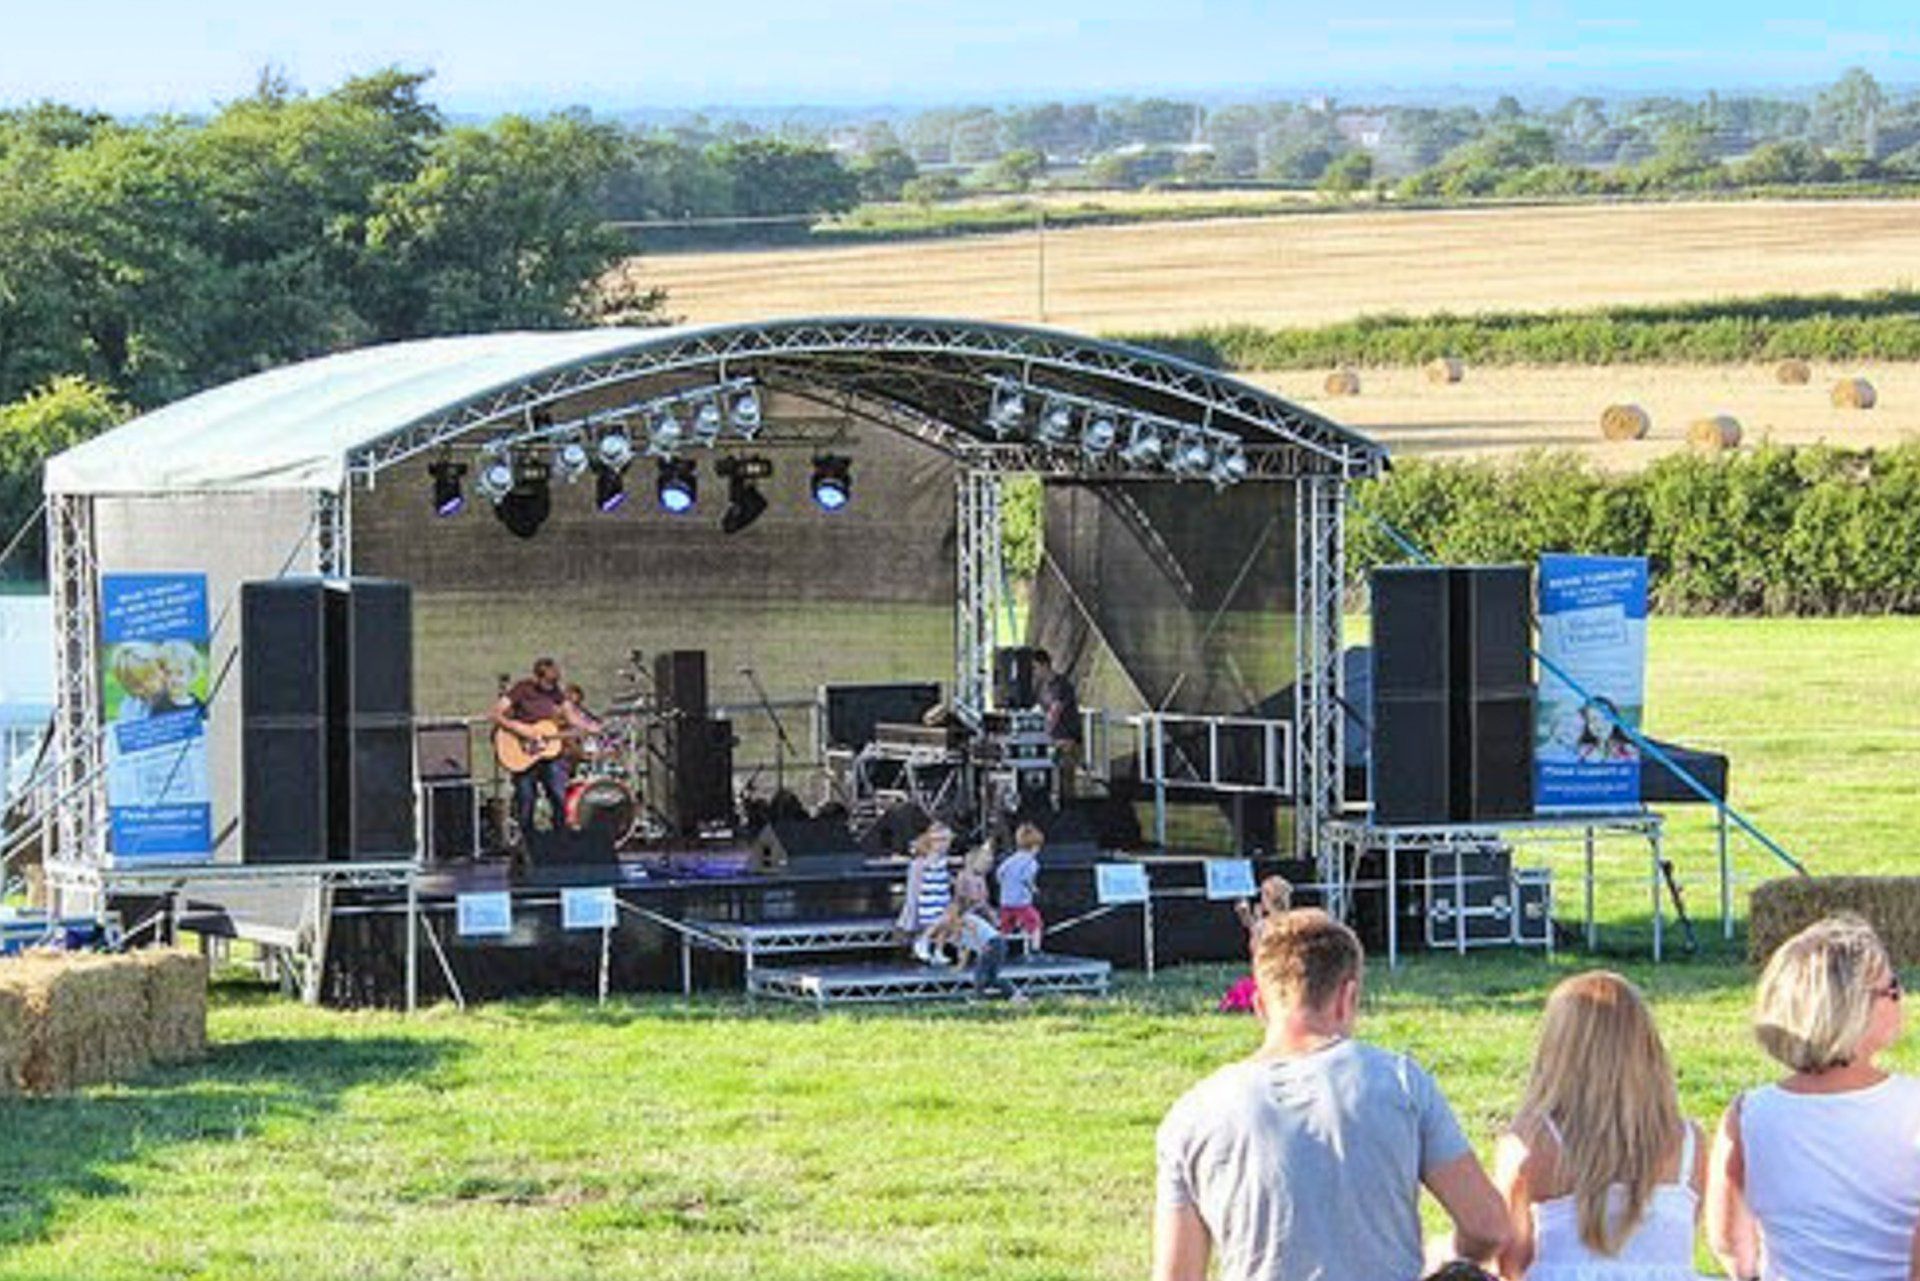 An arc truss stage in a field with performers on it and an audience watching on